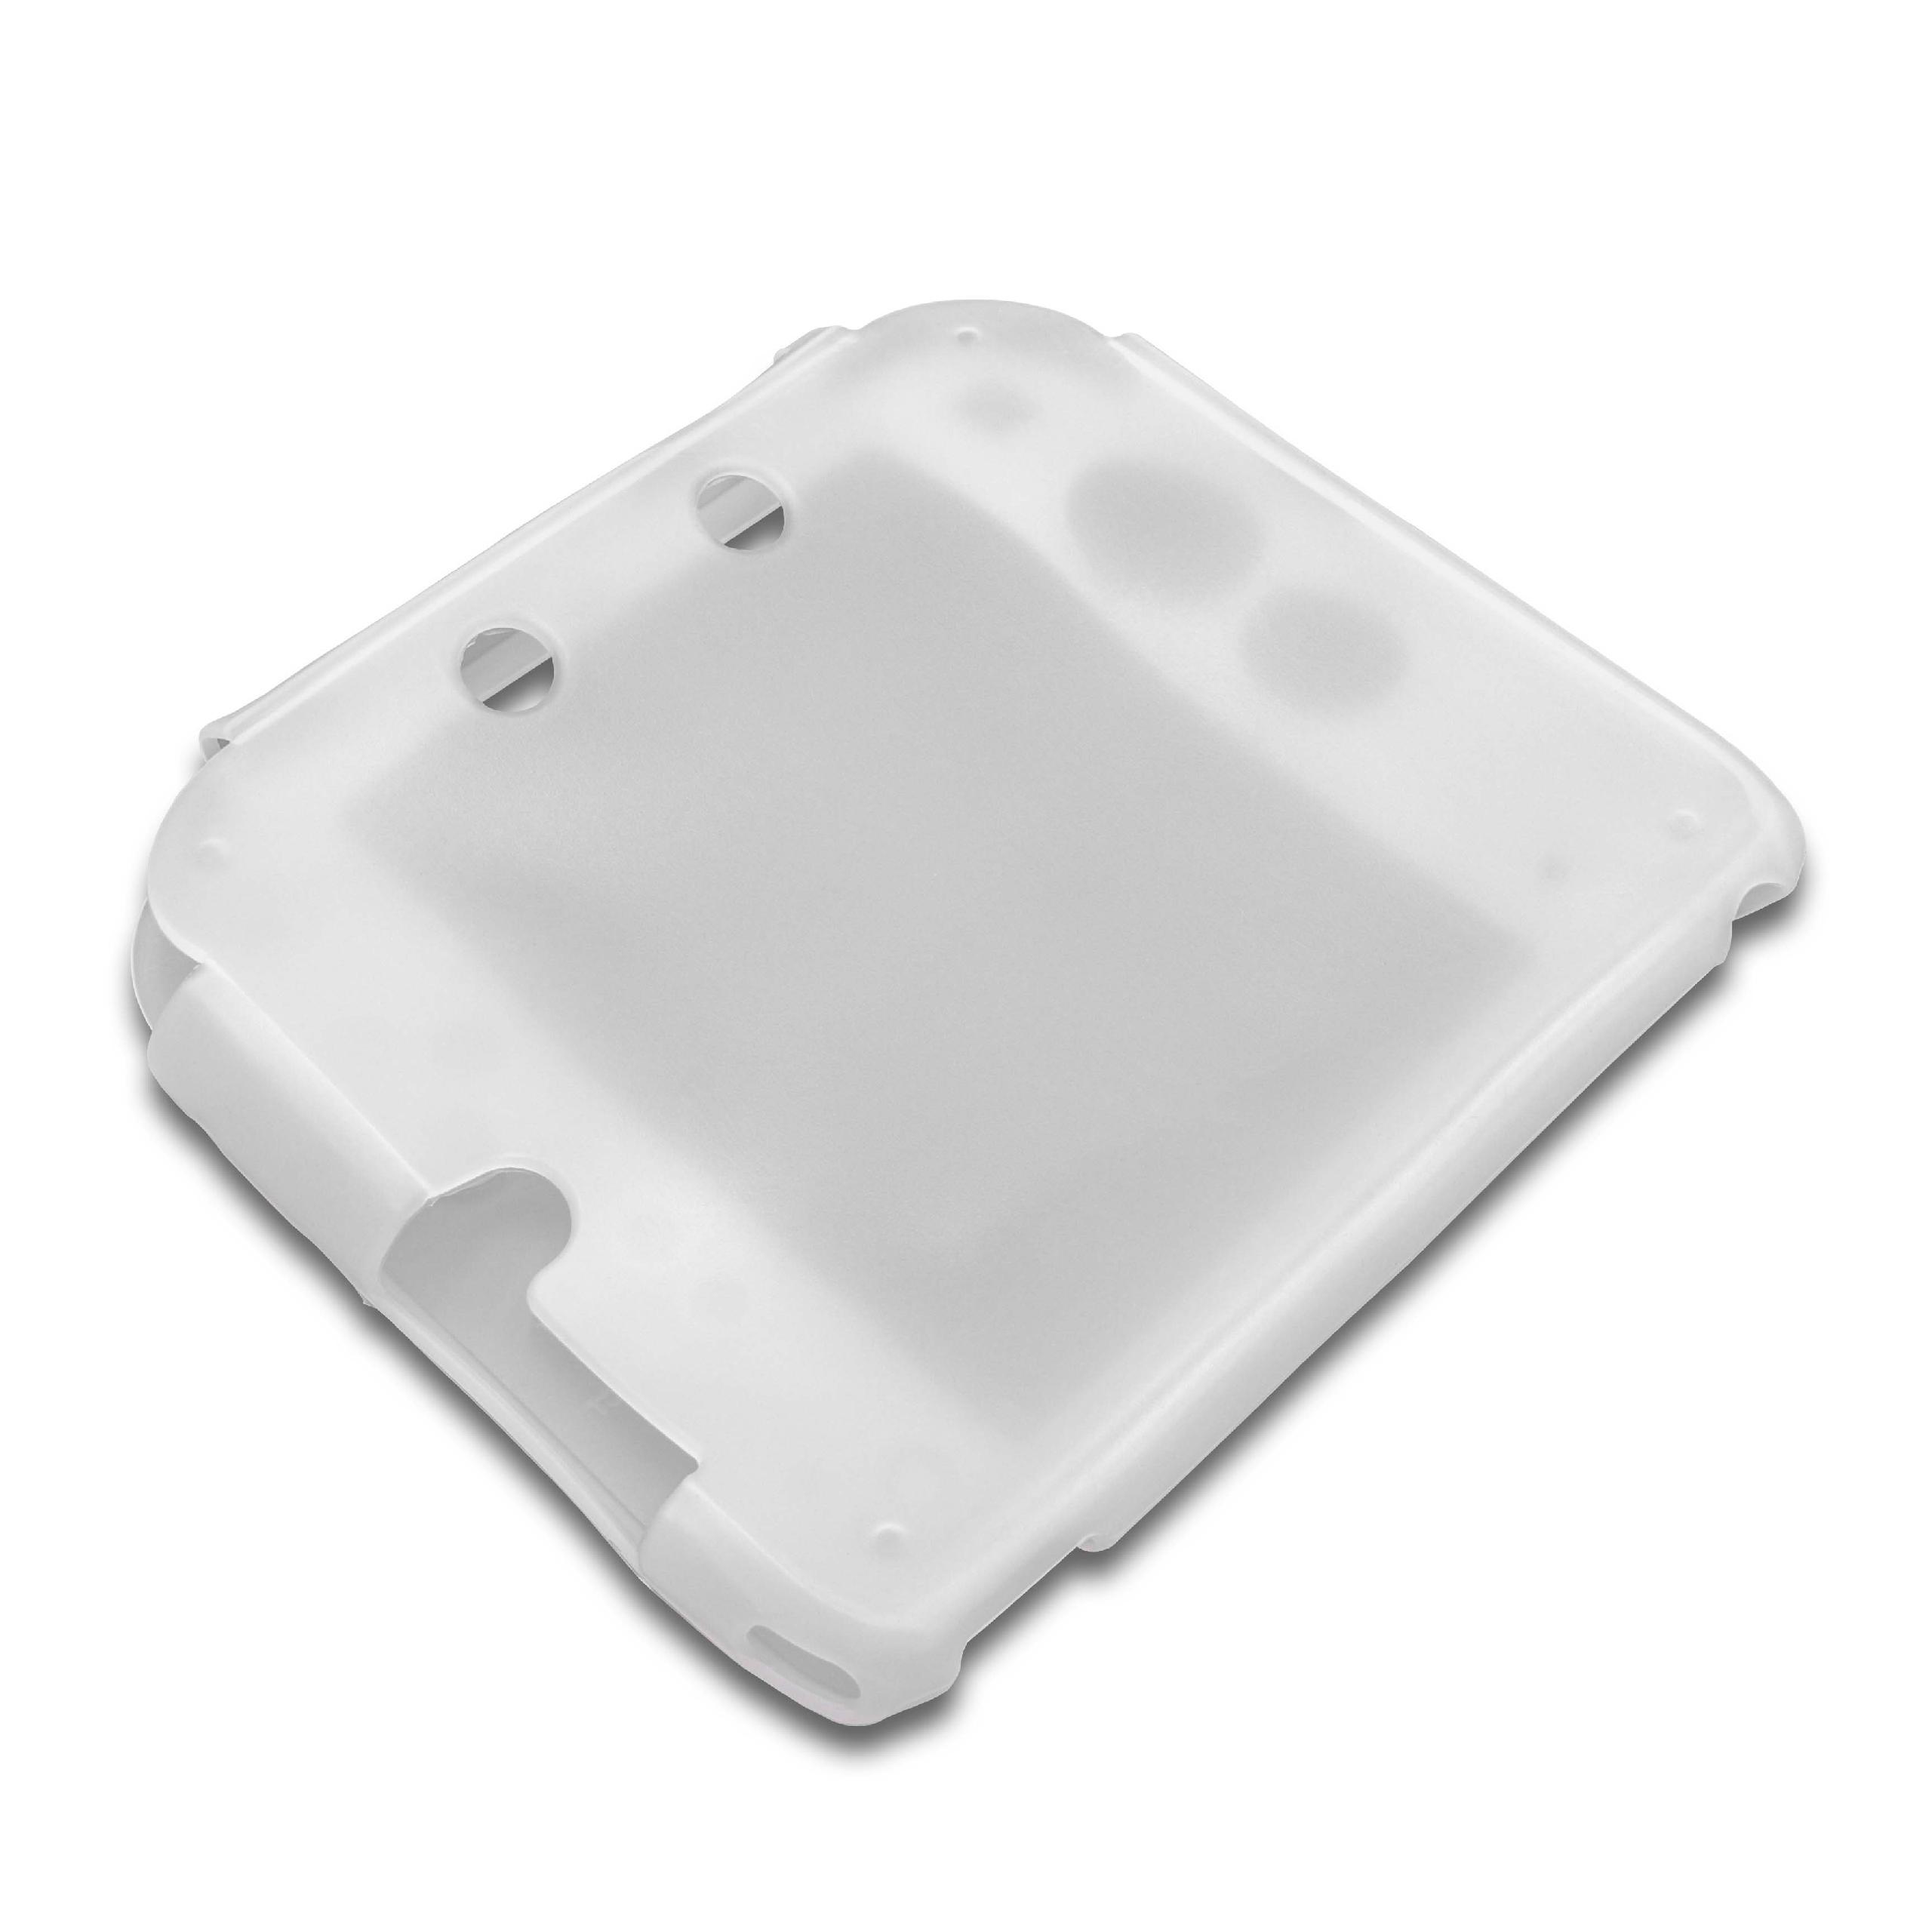 Cover suitable for Nintendo 2DS Gaming Console - Case, Silicone, White